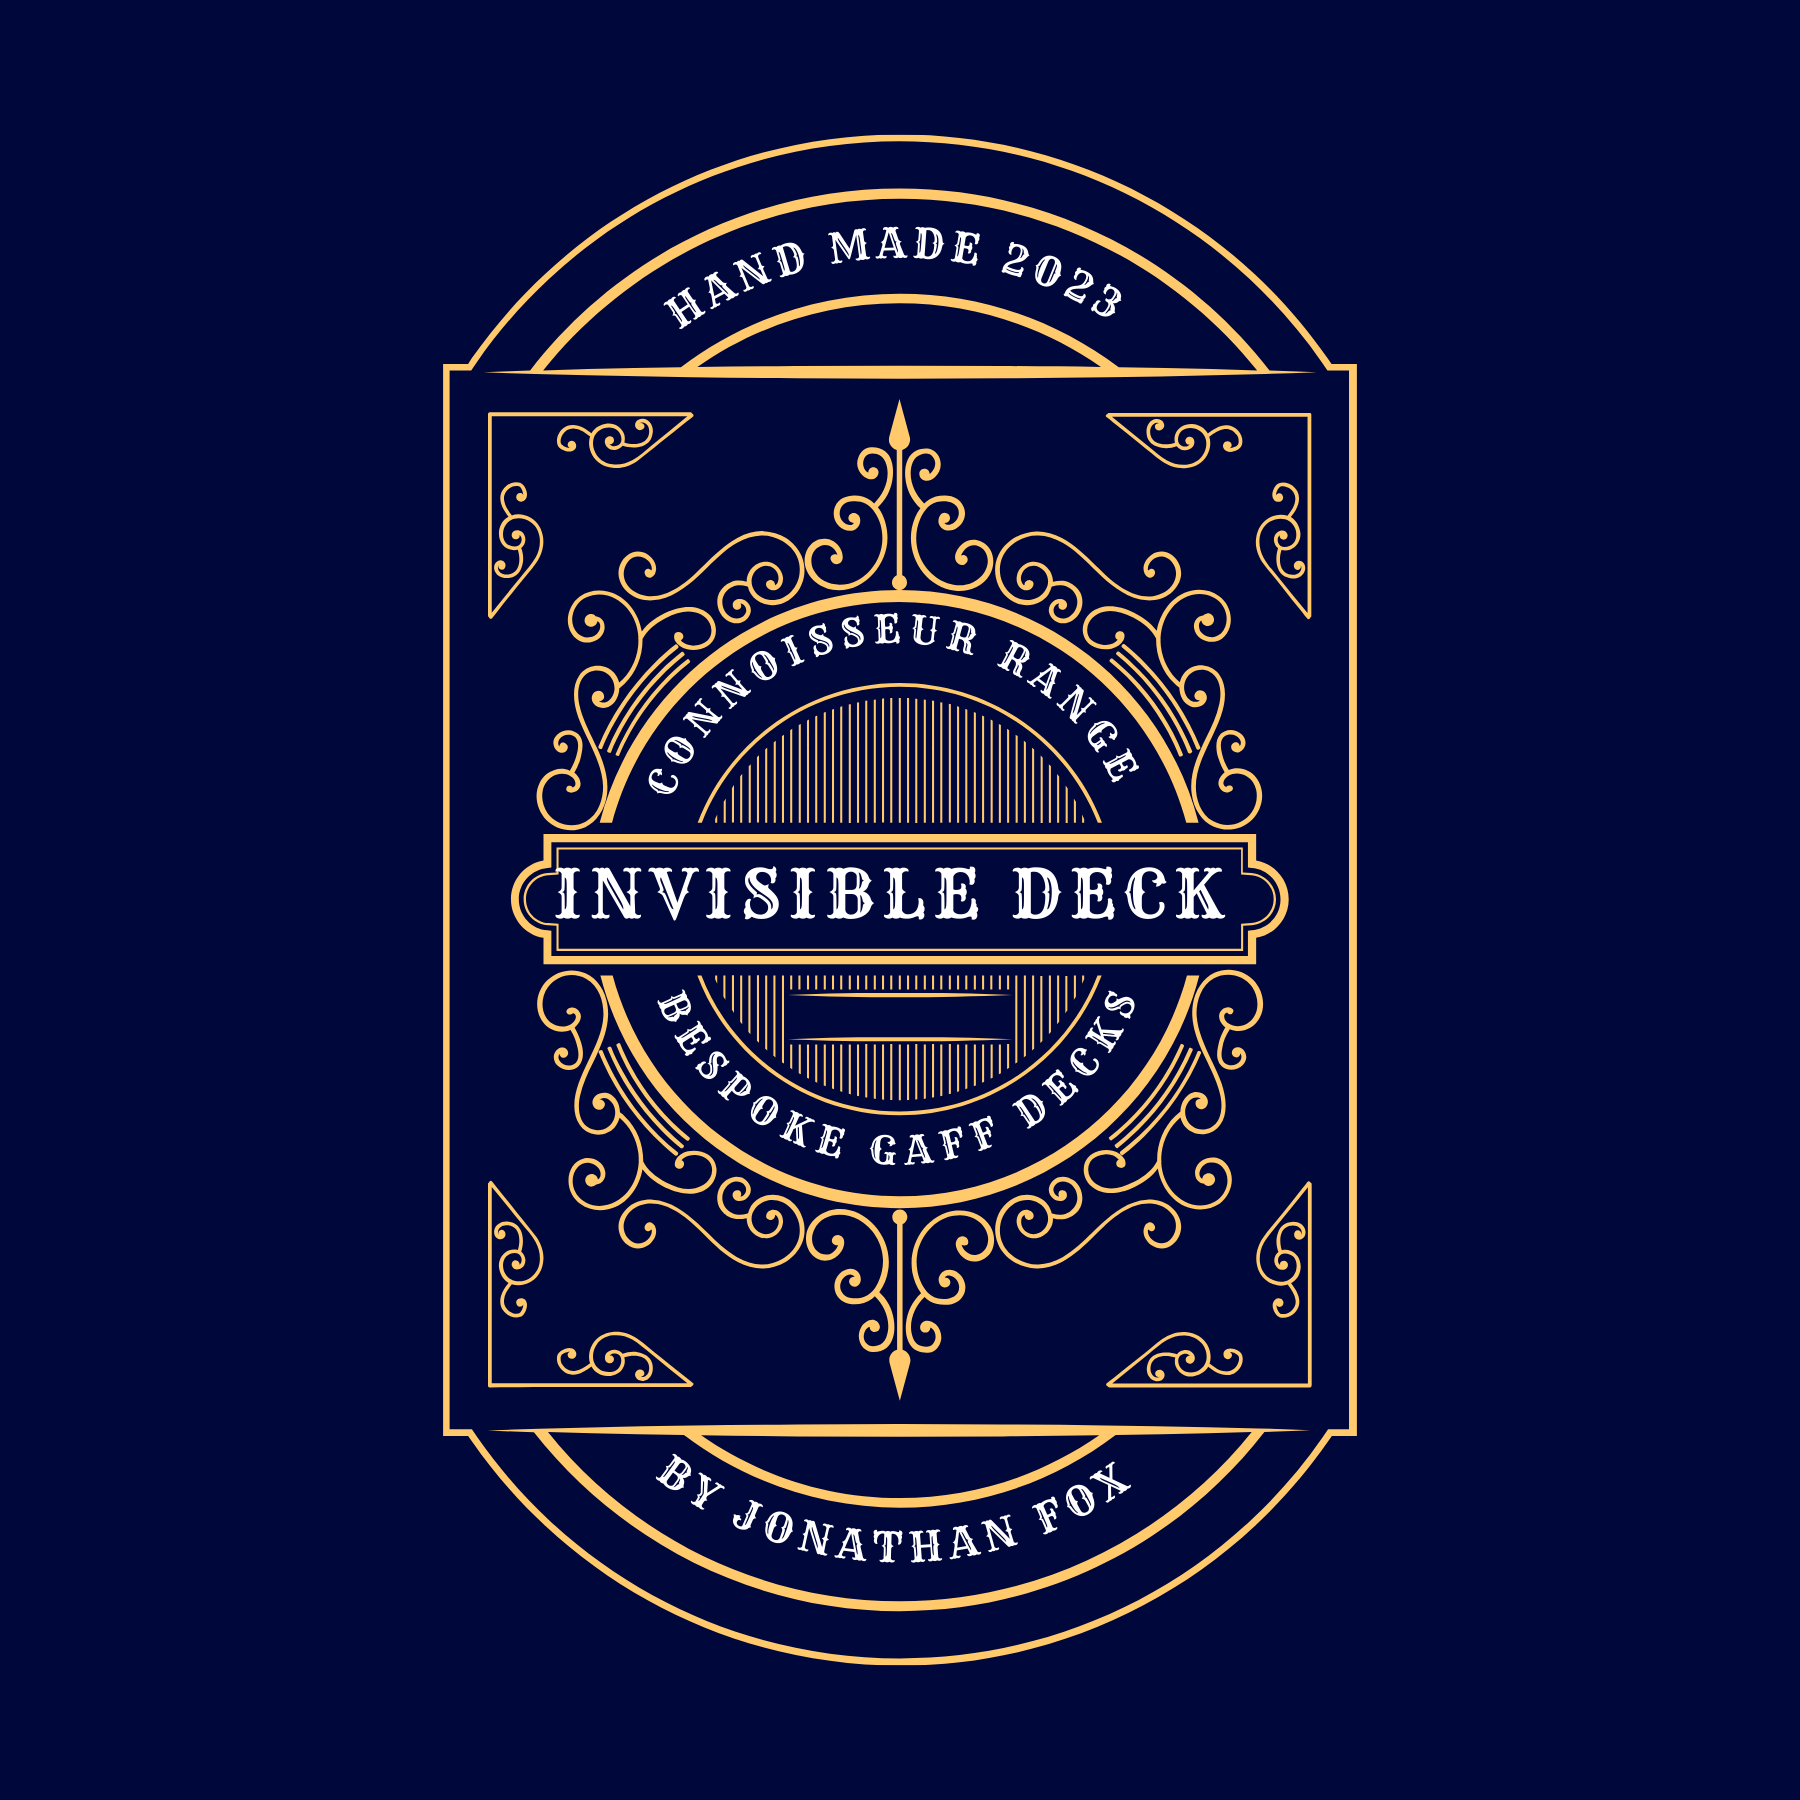 Invisible Deck by Jonathan Fox